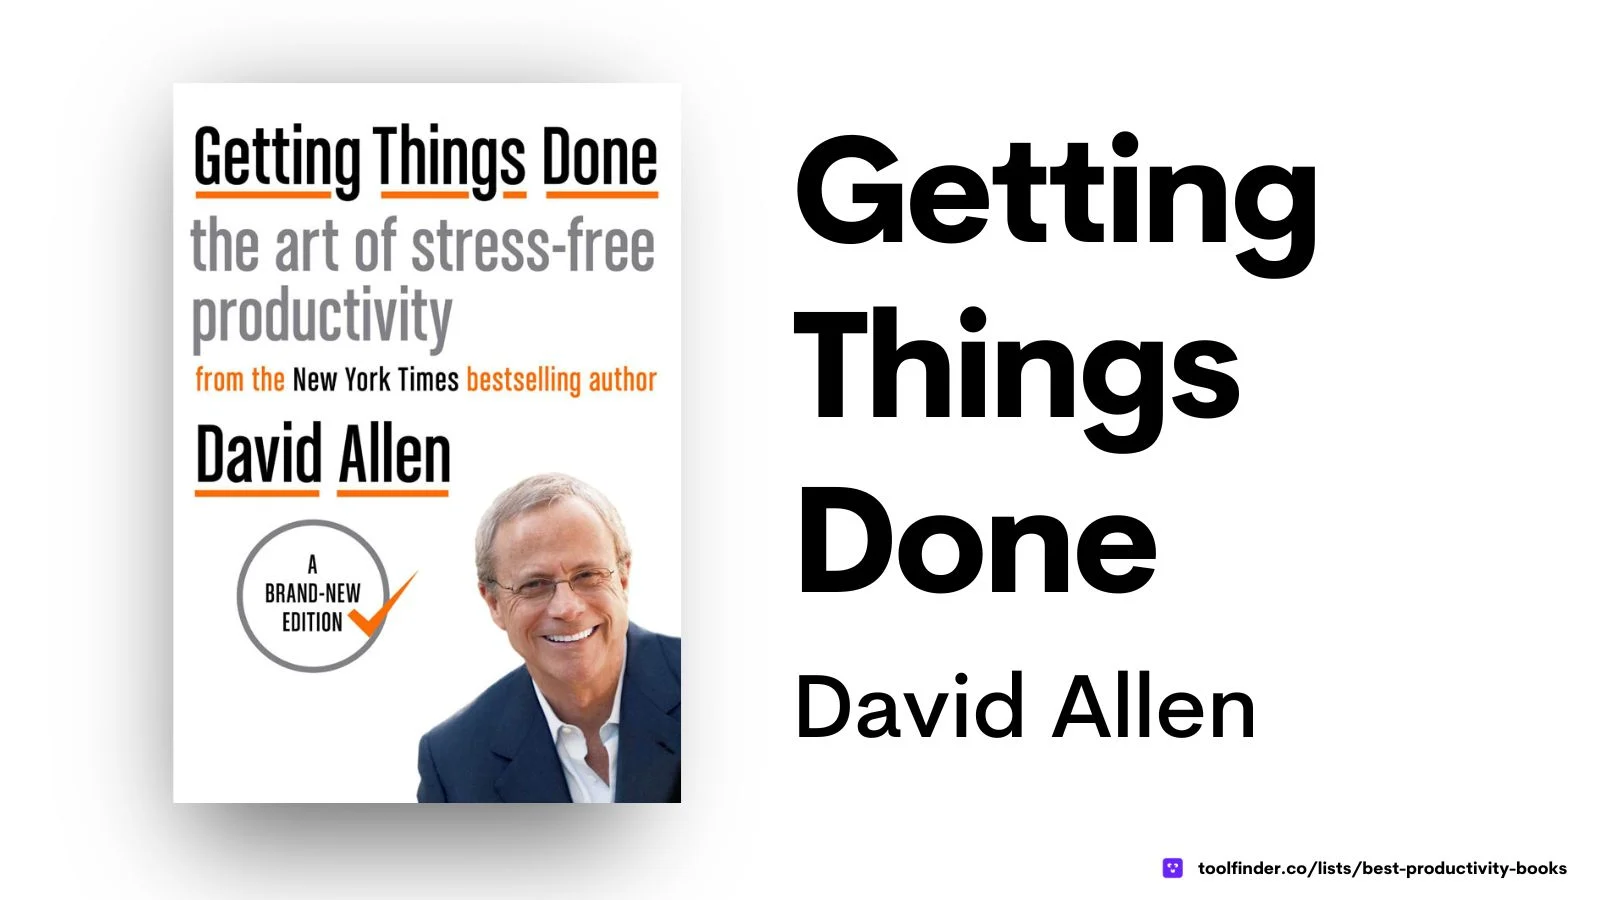 Getting Things Done by David Allen book for boosting productivity with the GTD method.